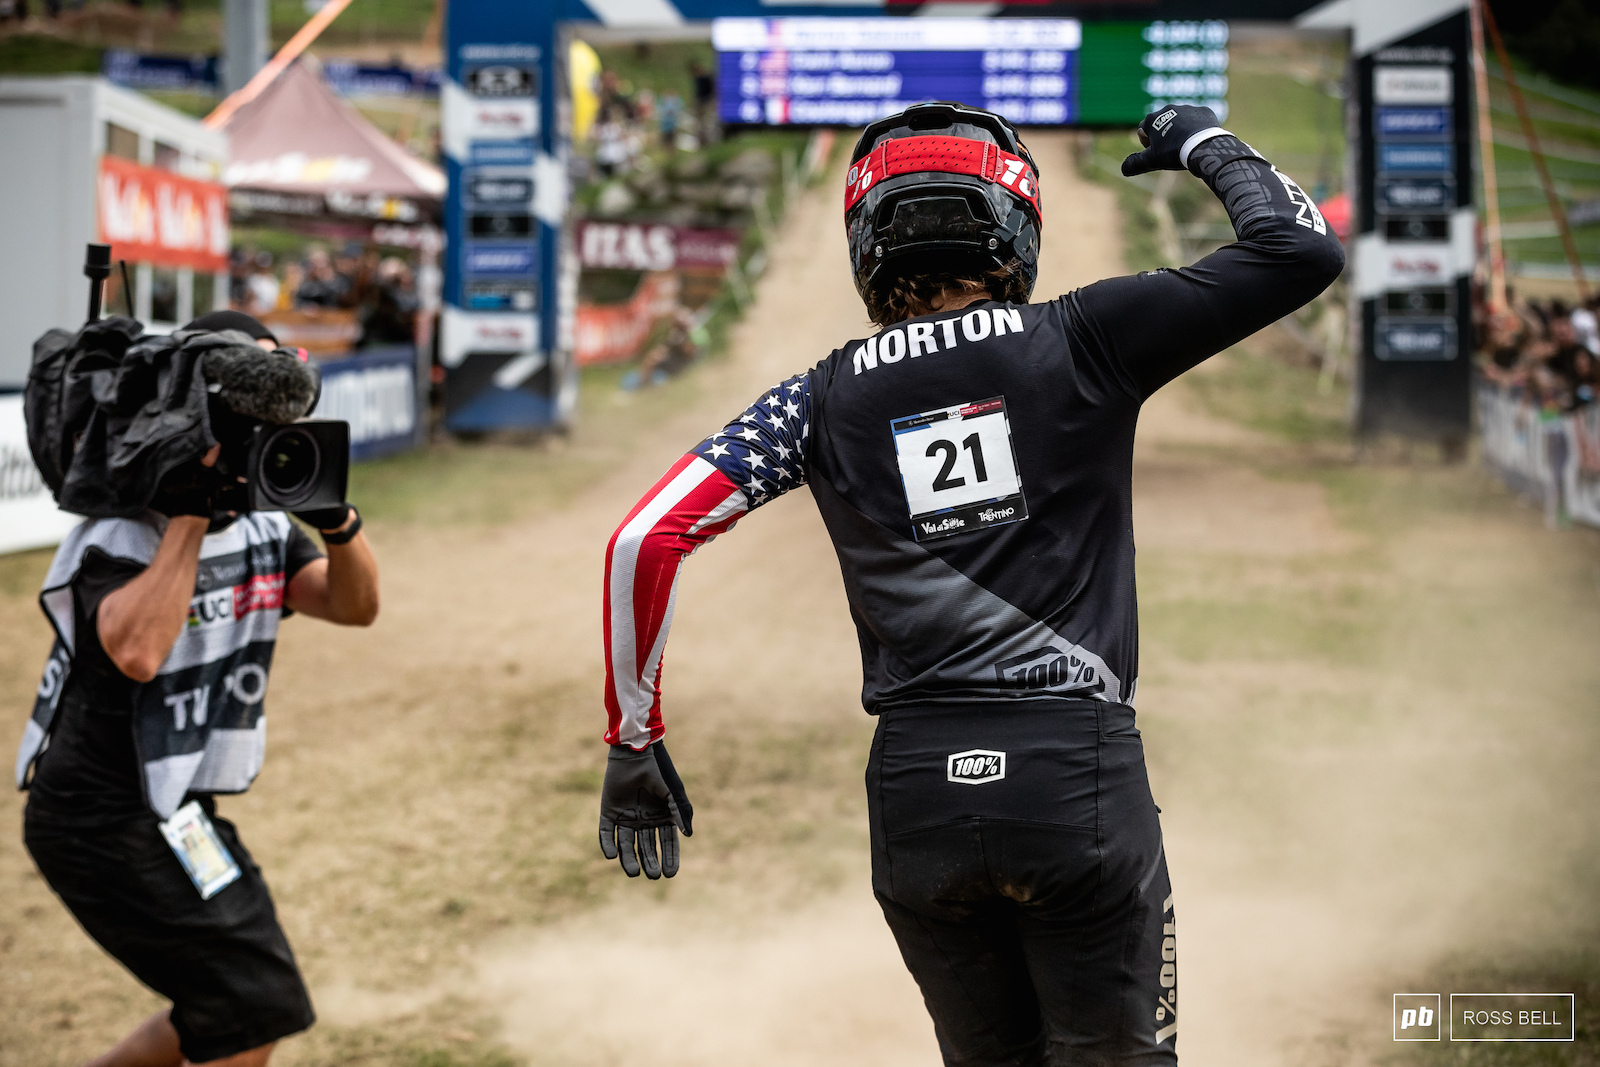 After a few misfortunes this year Dakotah Norton showed us just what he had in the tank.